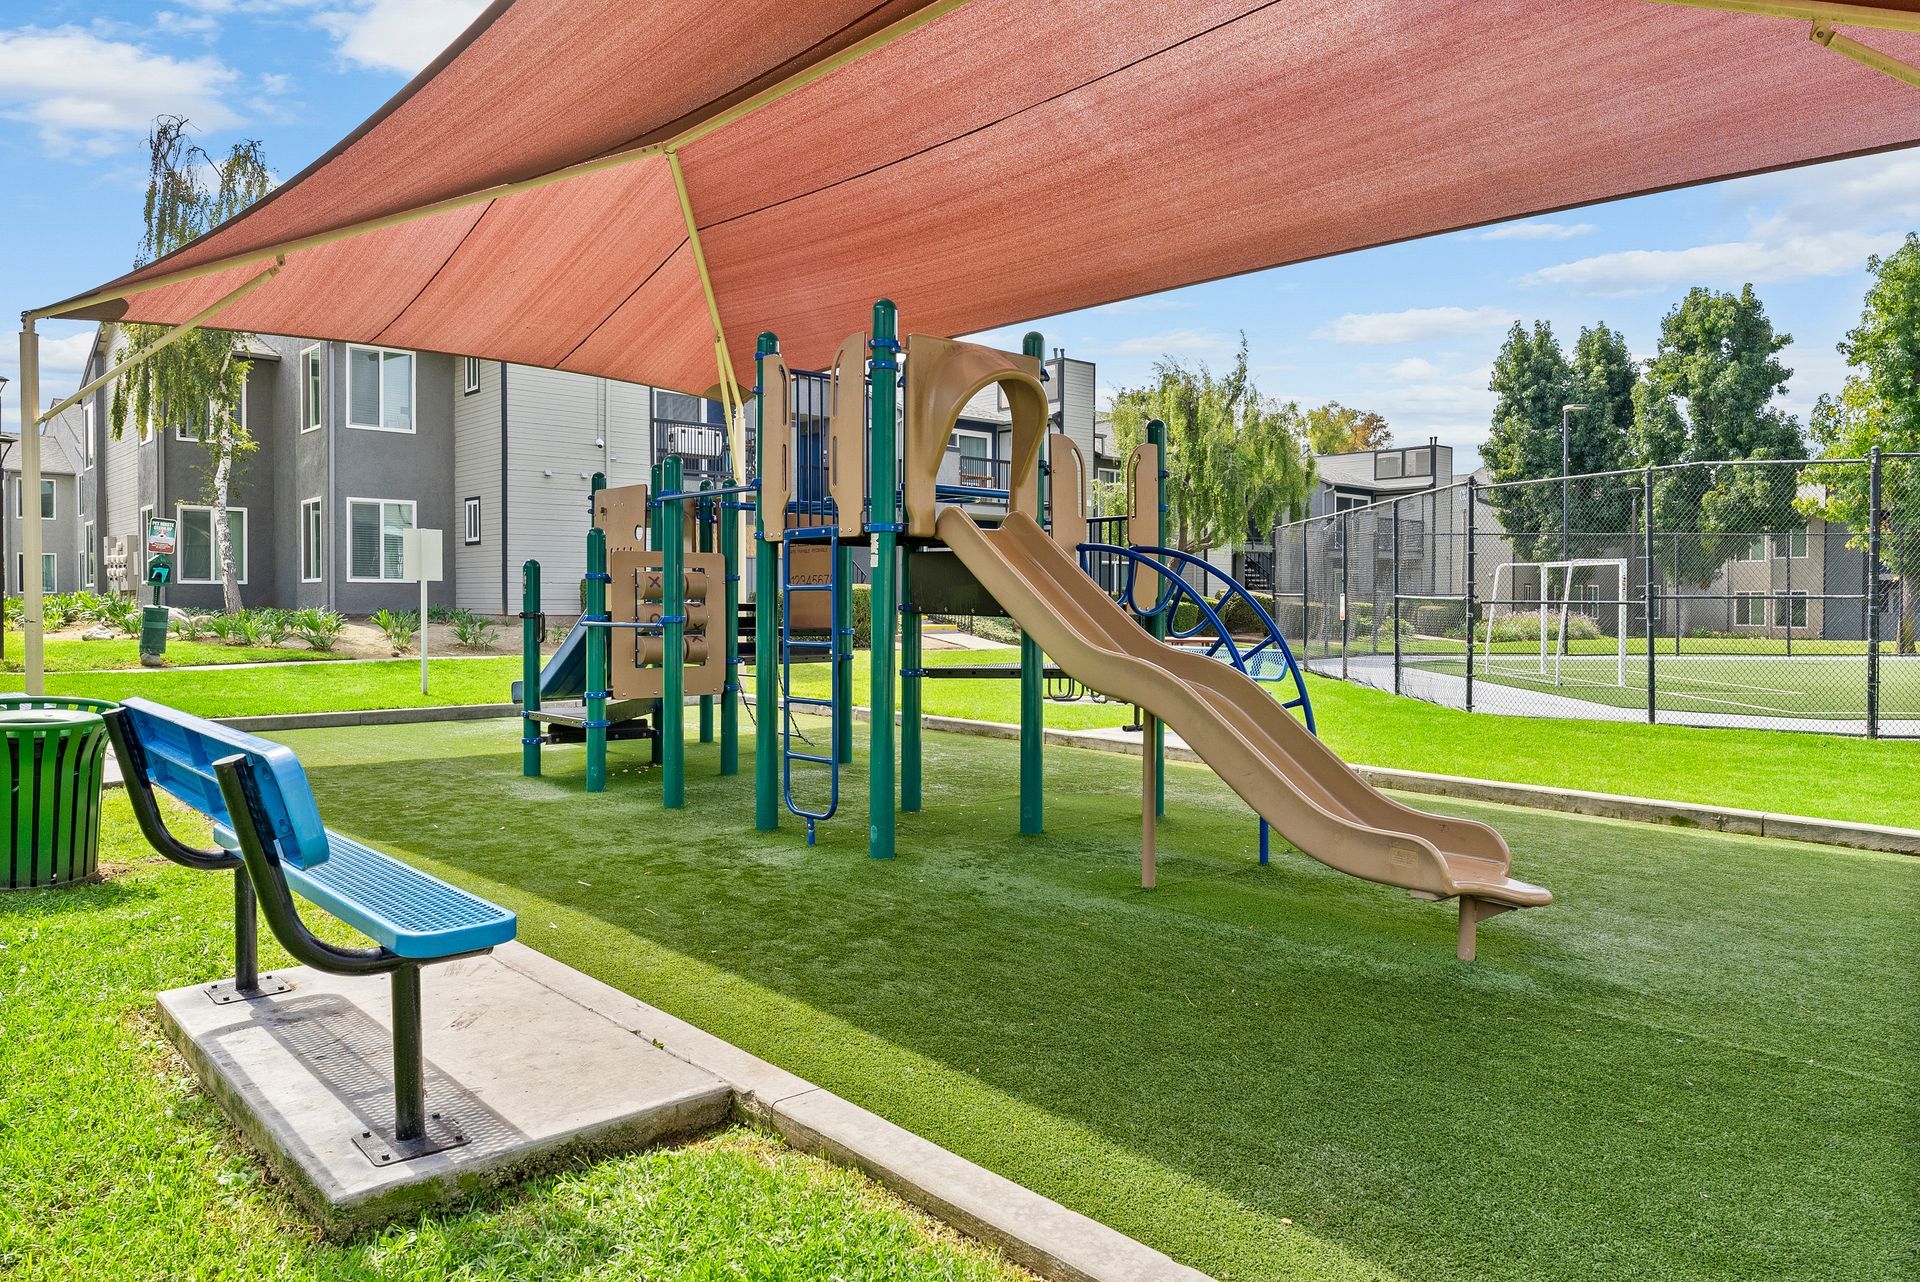 A playground with a slide and a bench under an umbrella.